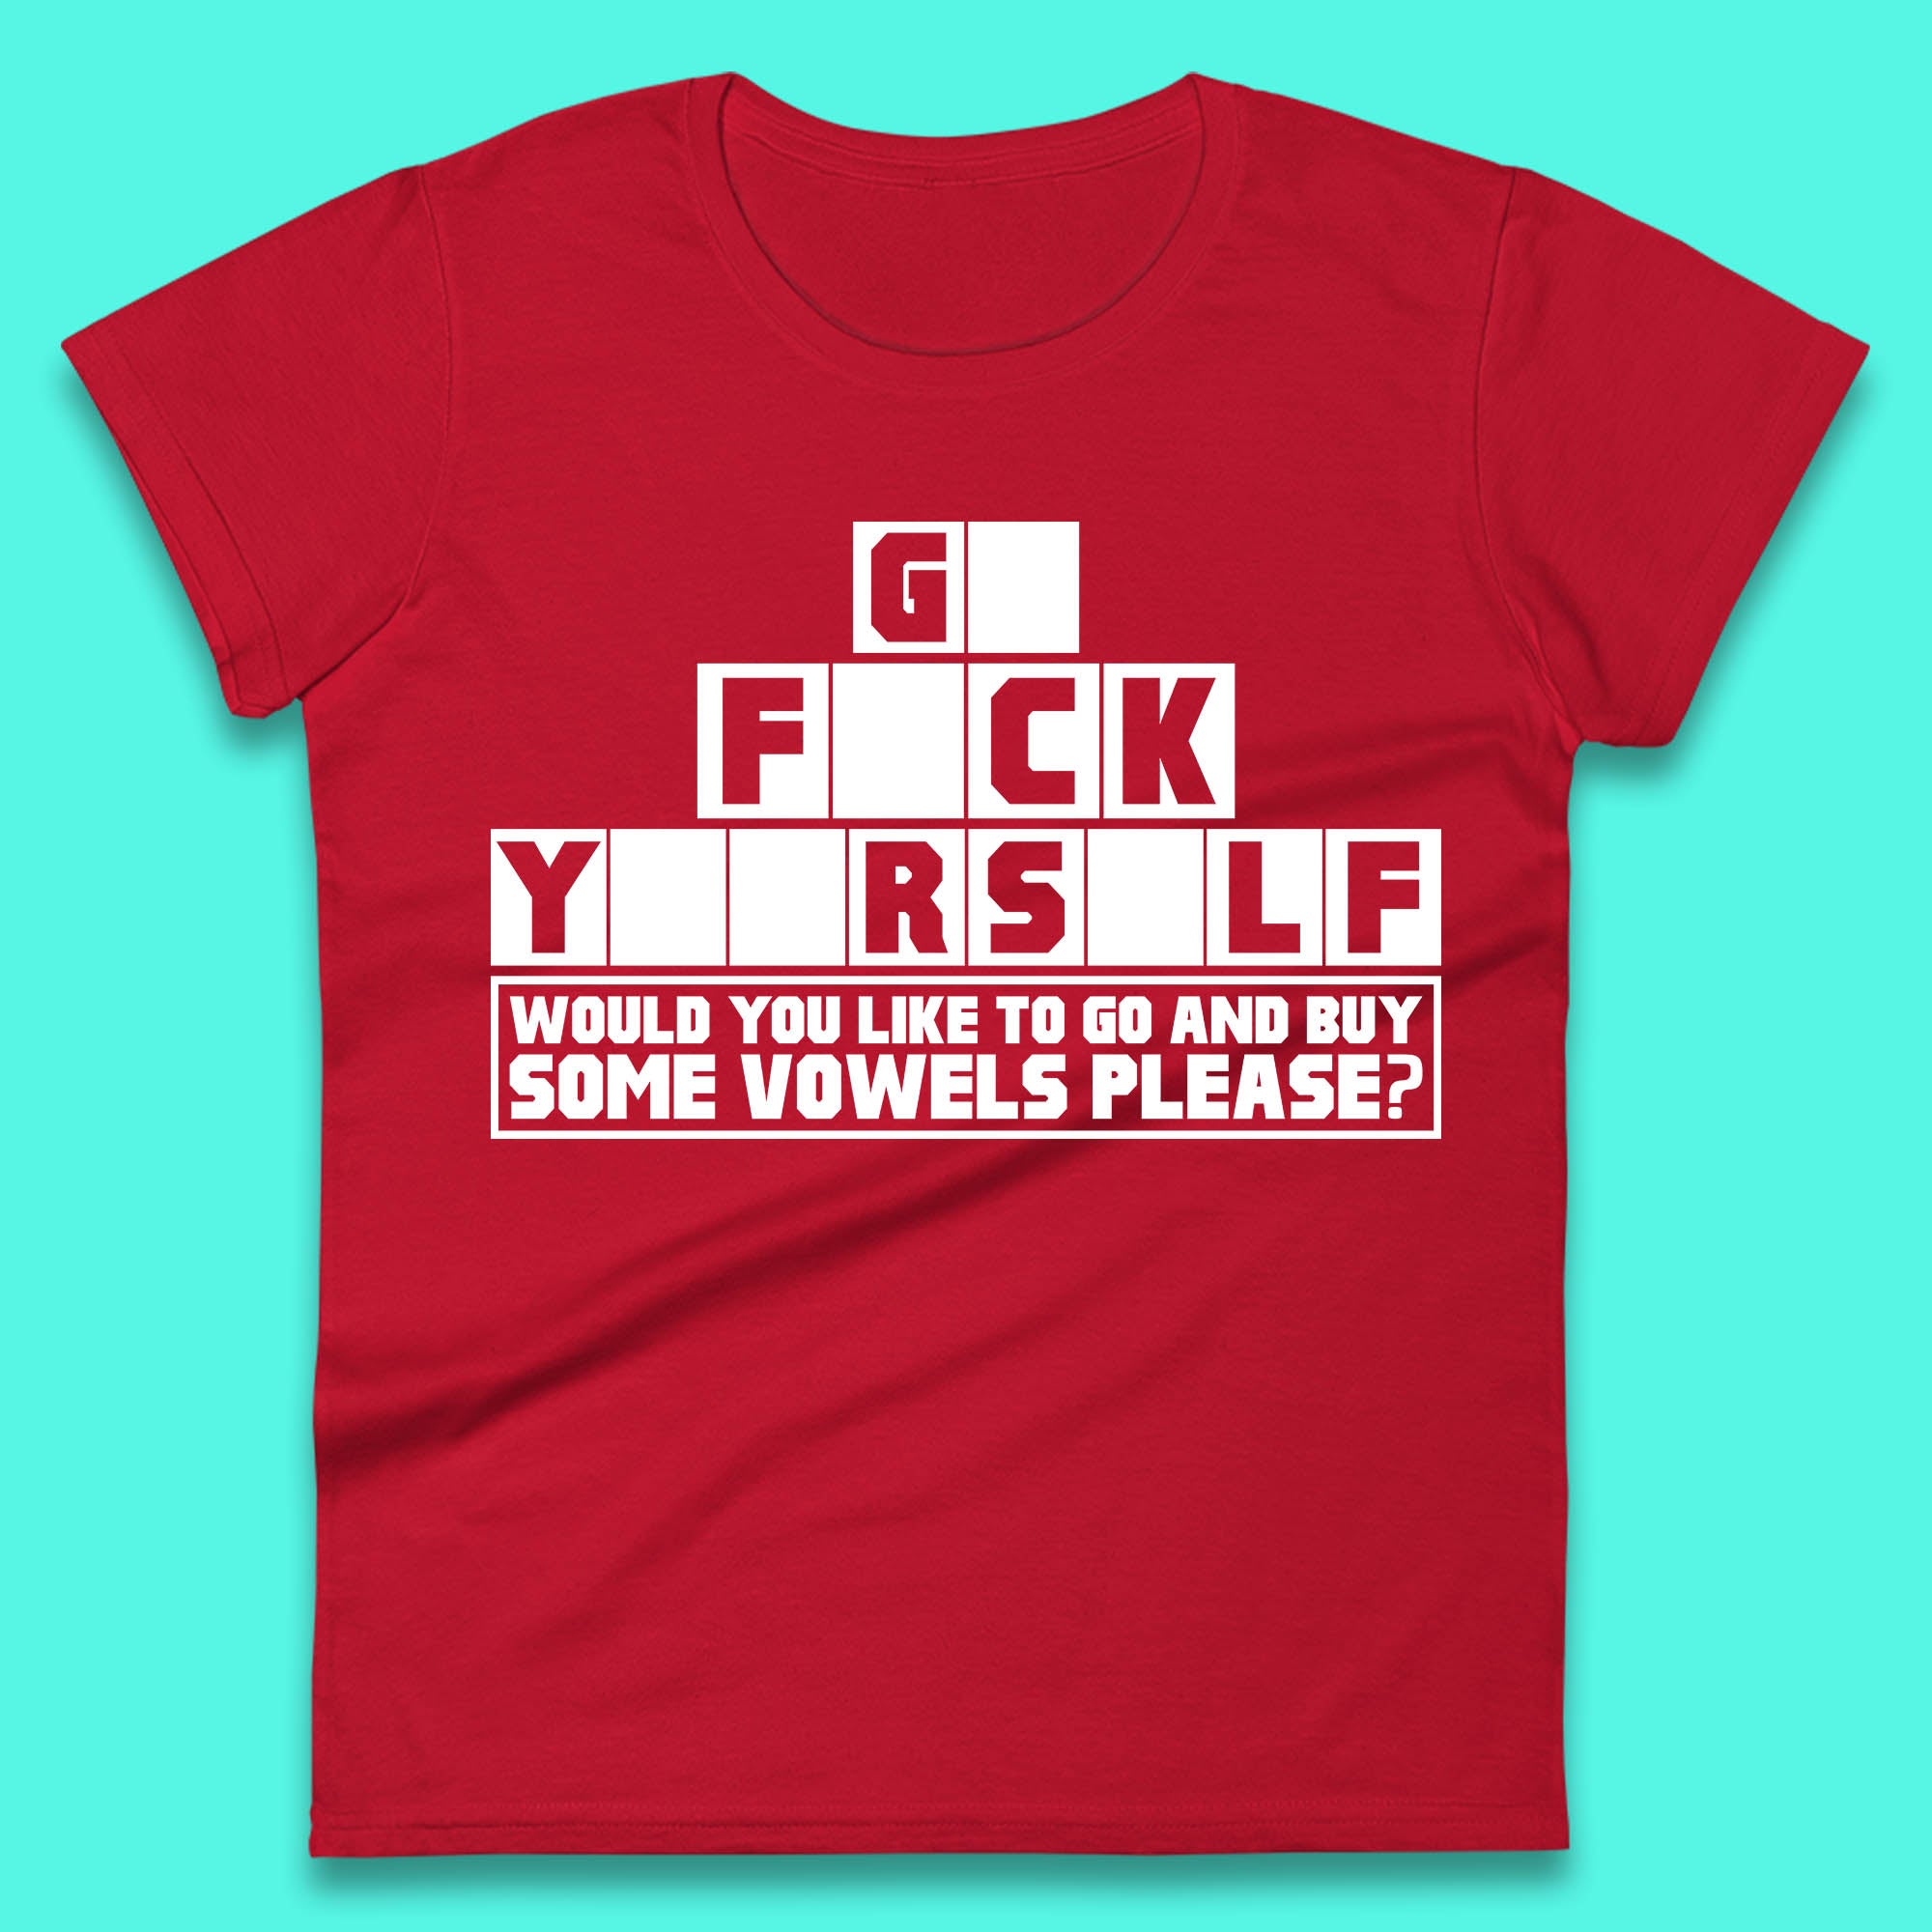 Go F*ck Yourself Would You Like To Go And Buy Some Vowels Please? Funny Rude Sarcastic Offensive Gift Womens Tee Top